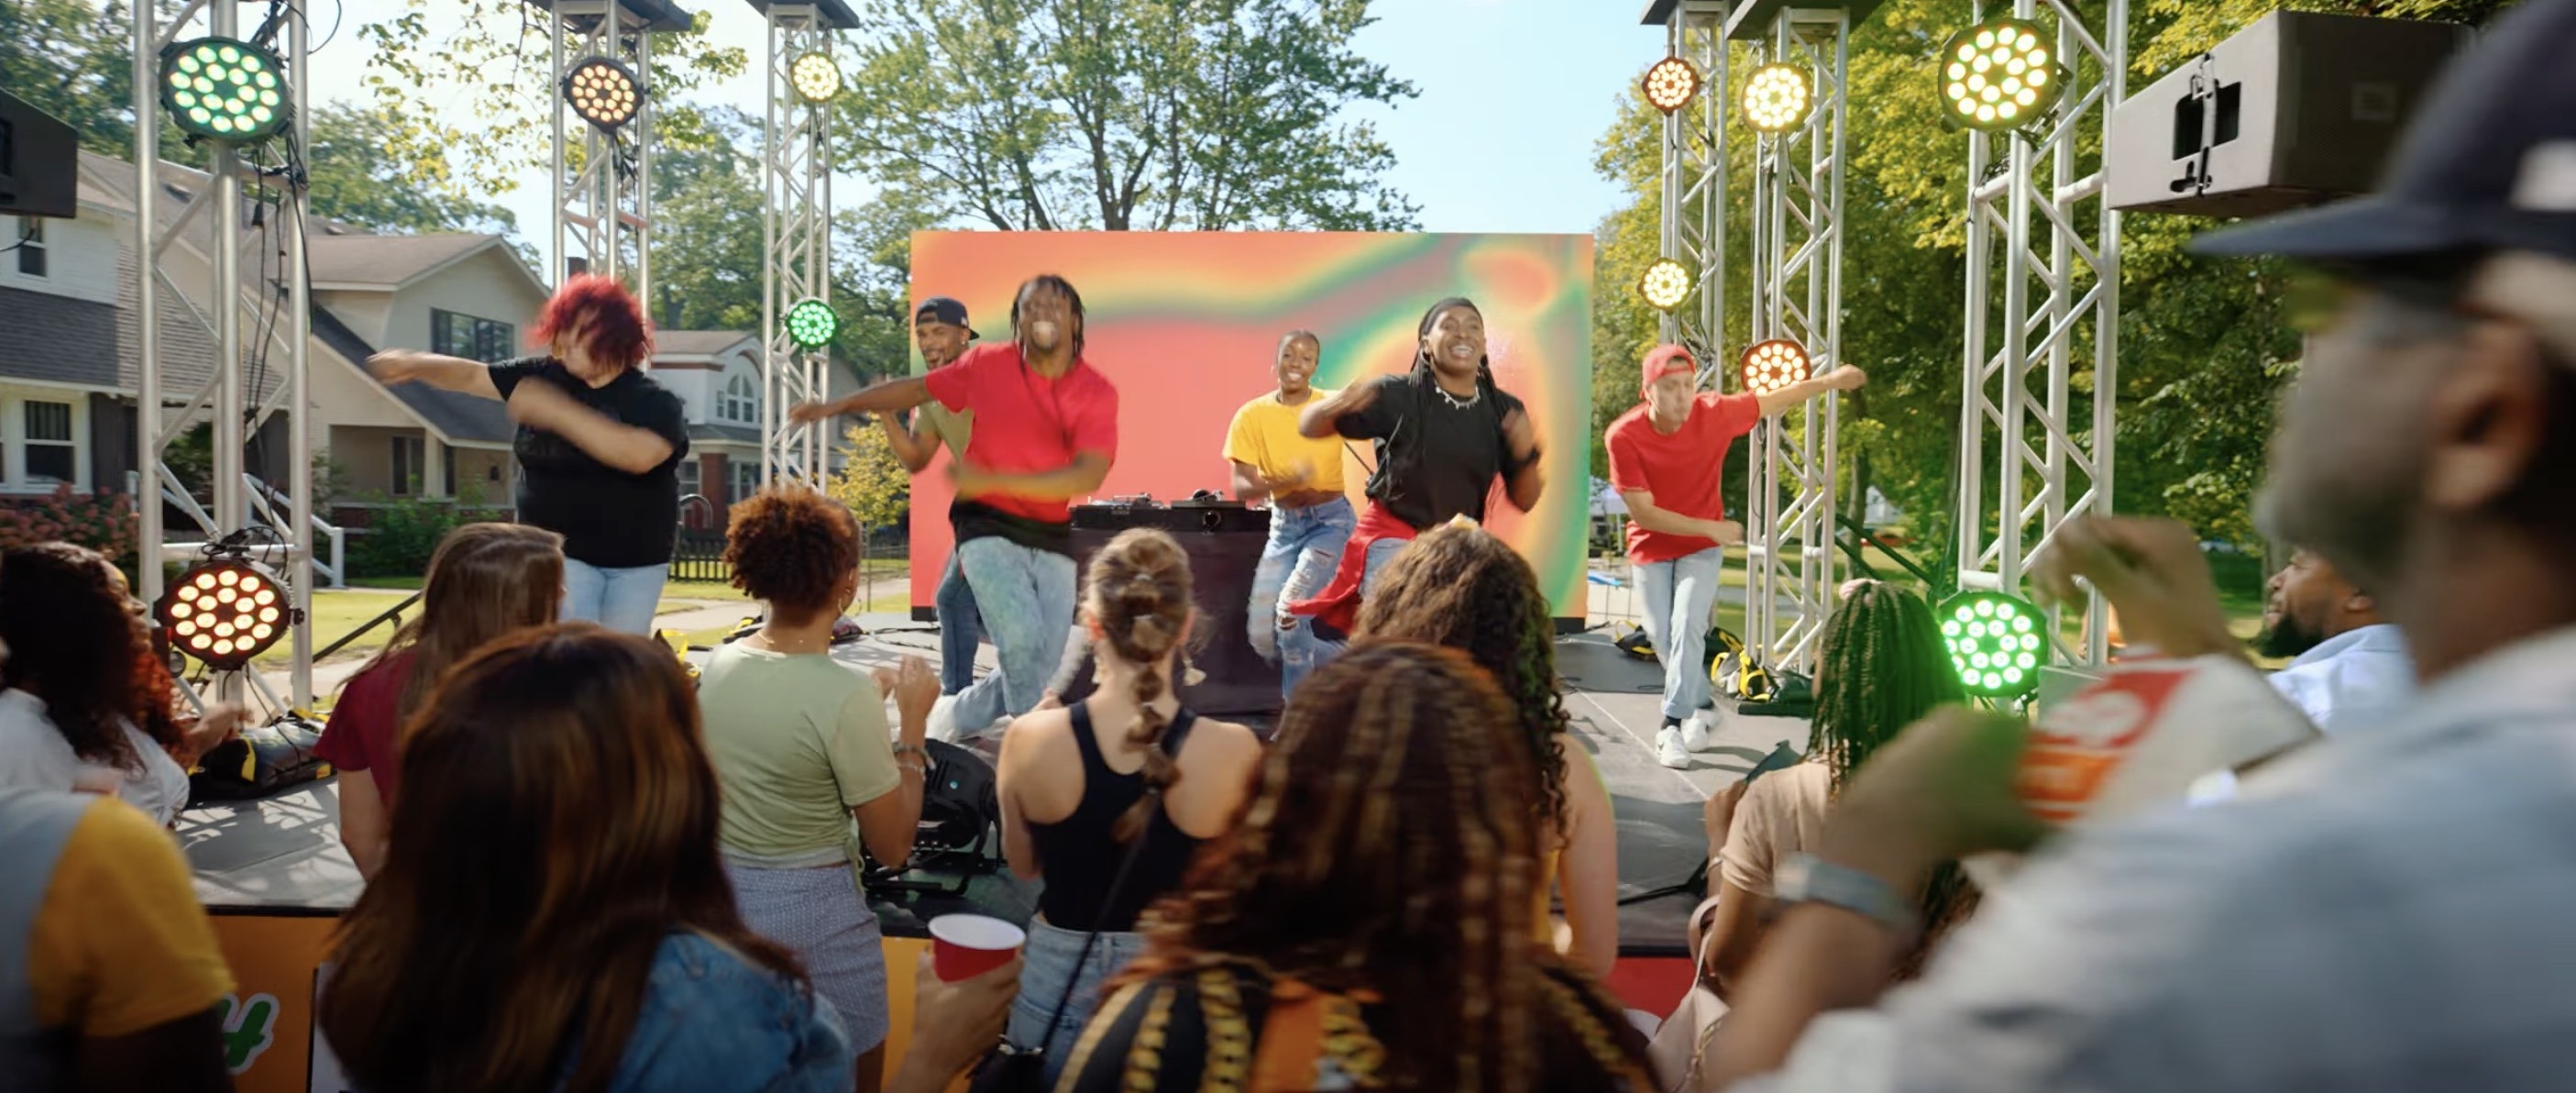 People dancing onstage at a block party